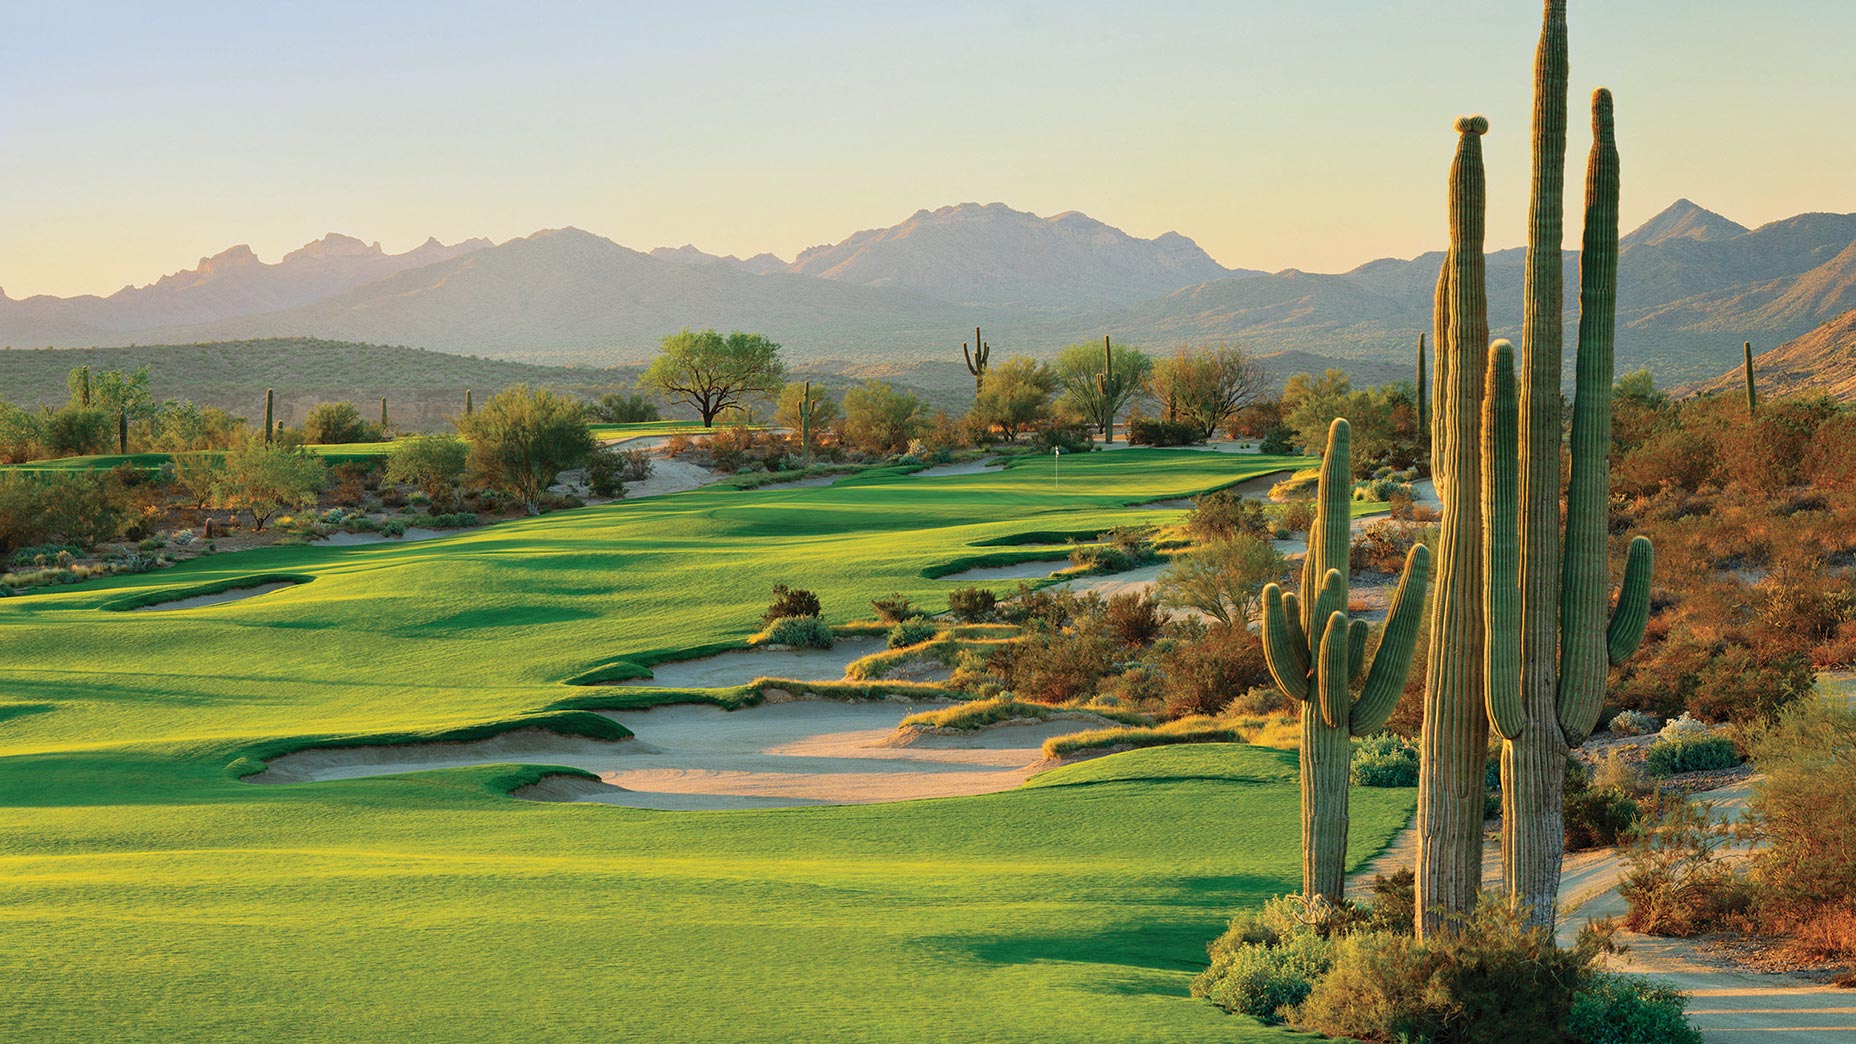 Best golf courses in Arizona, according to GOLF Magazine’s expert course raters